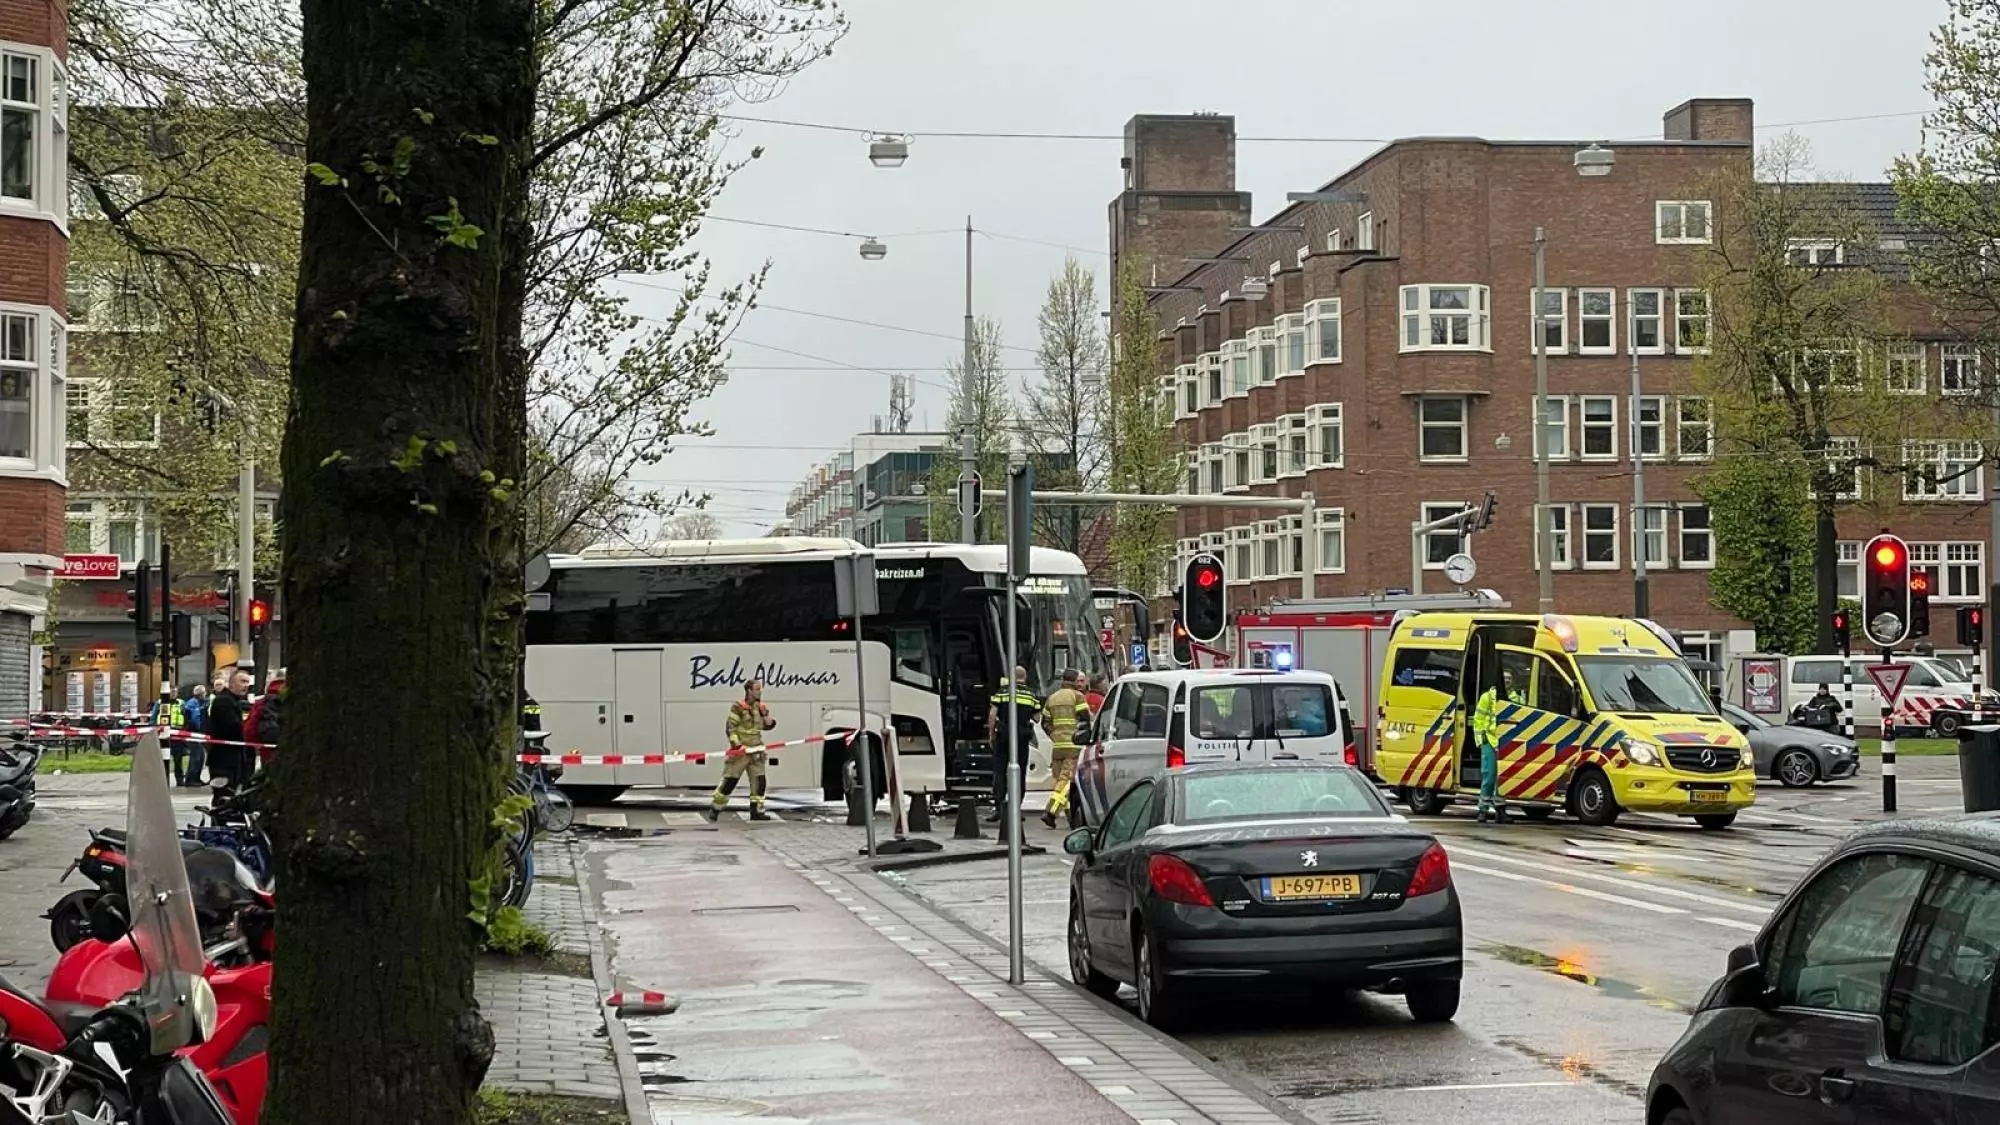 Cyclist seriously injured after colliding with bus in Amsterdam